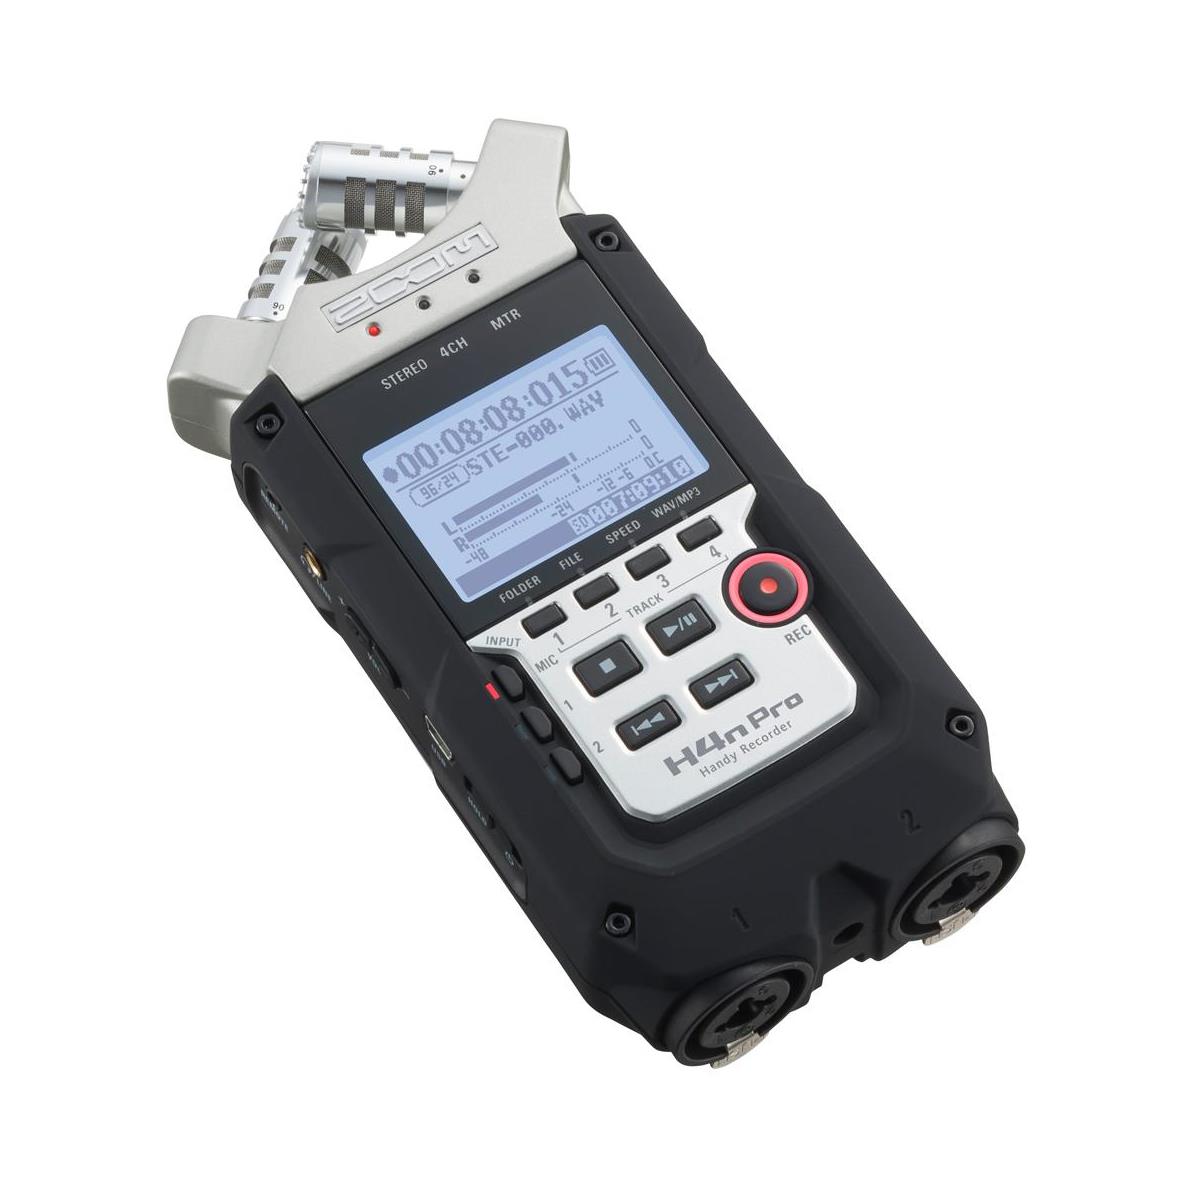 Zoom H4n Pro 4-Channel Handy Recorder -  ZH4NPRO